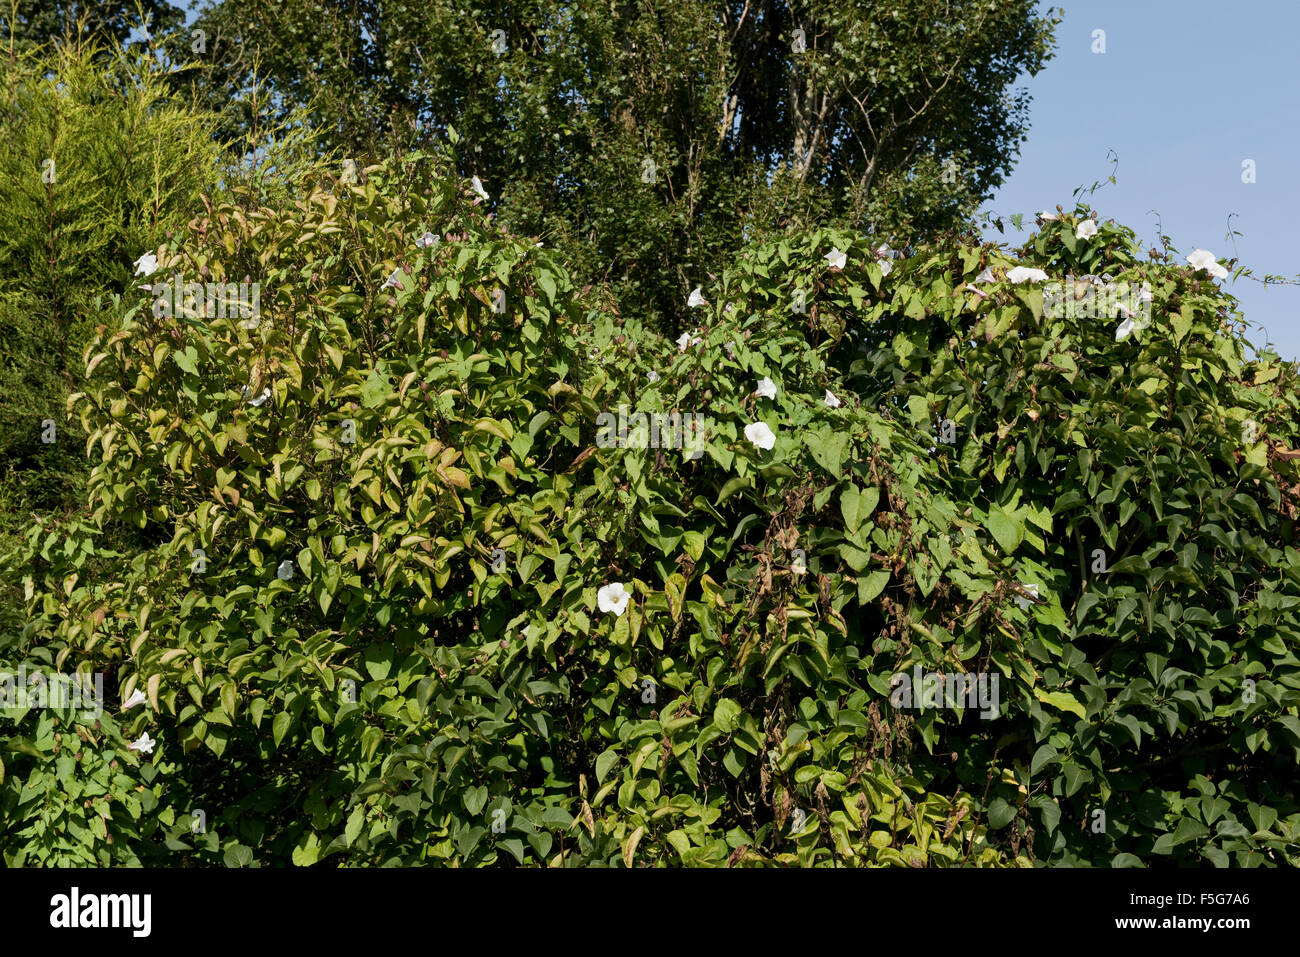 Large greater bindweed plant in late season covering a lilac tree with flowers and seeding pods, September Stock Photo